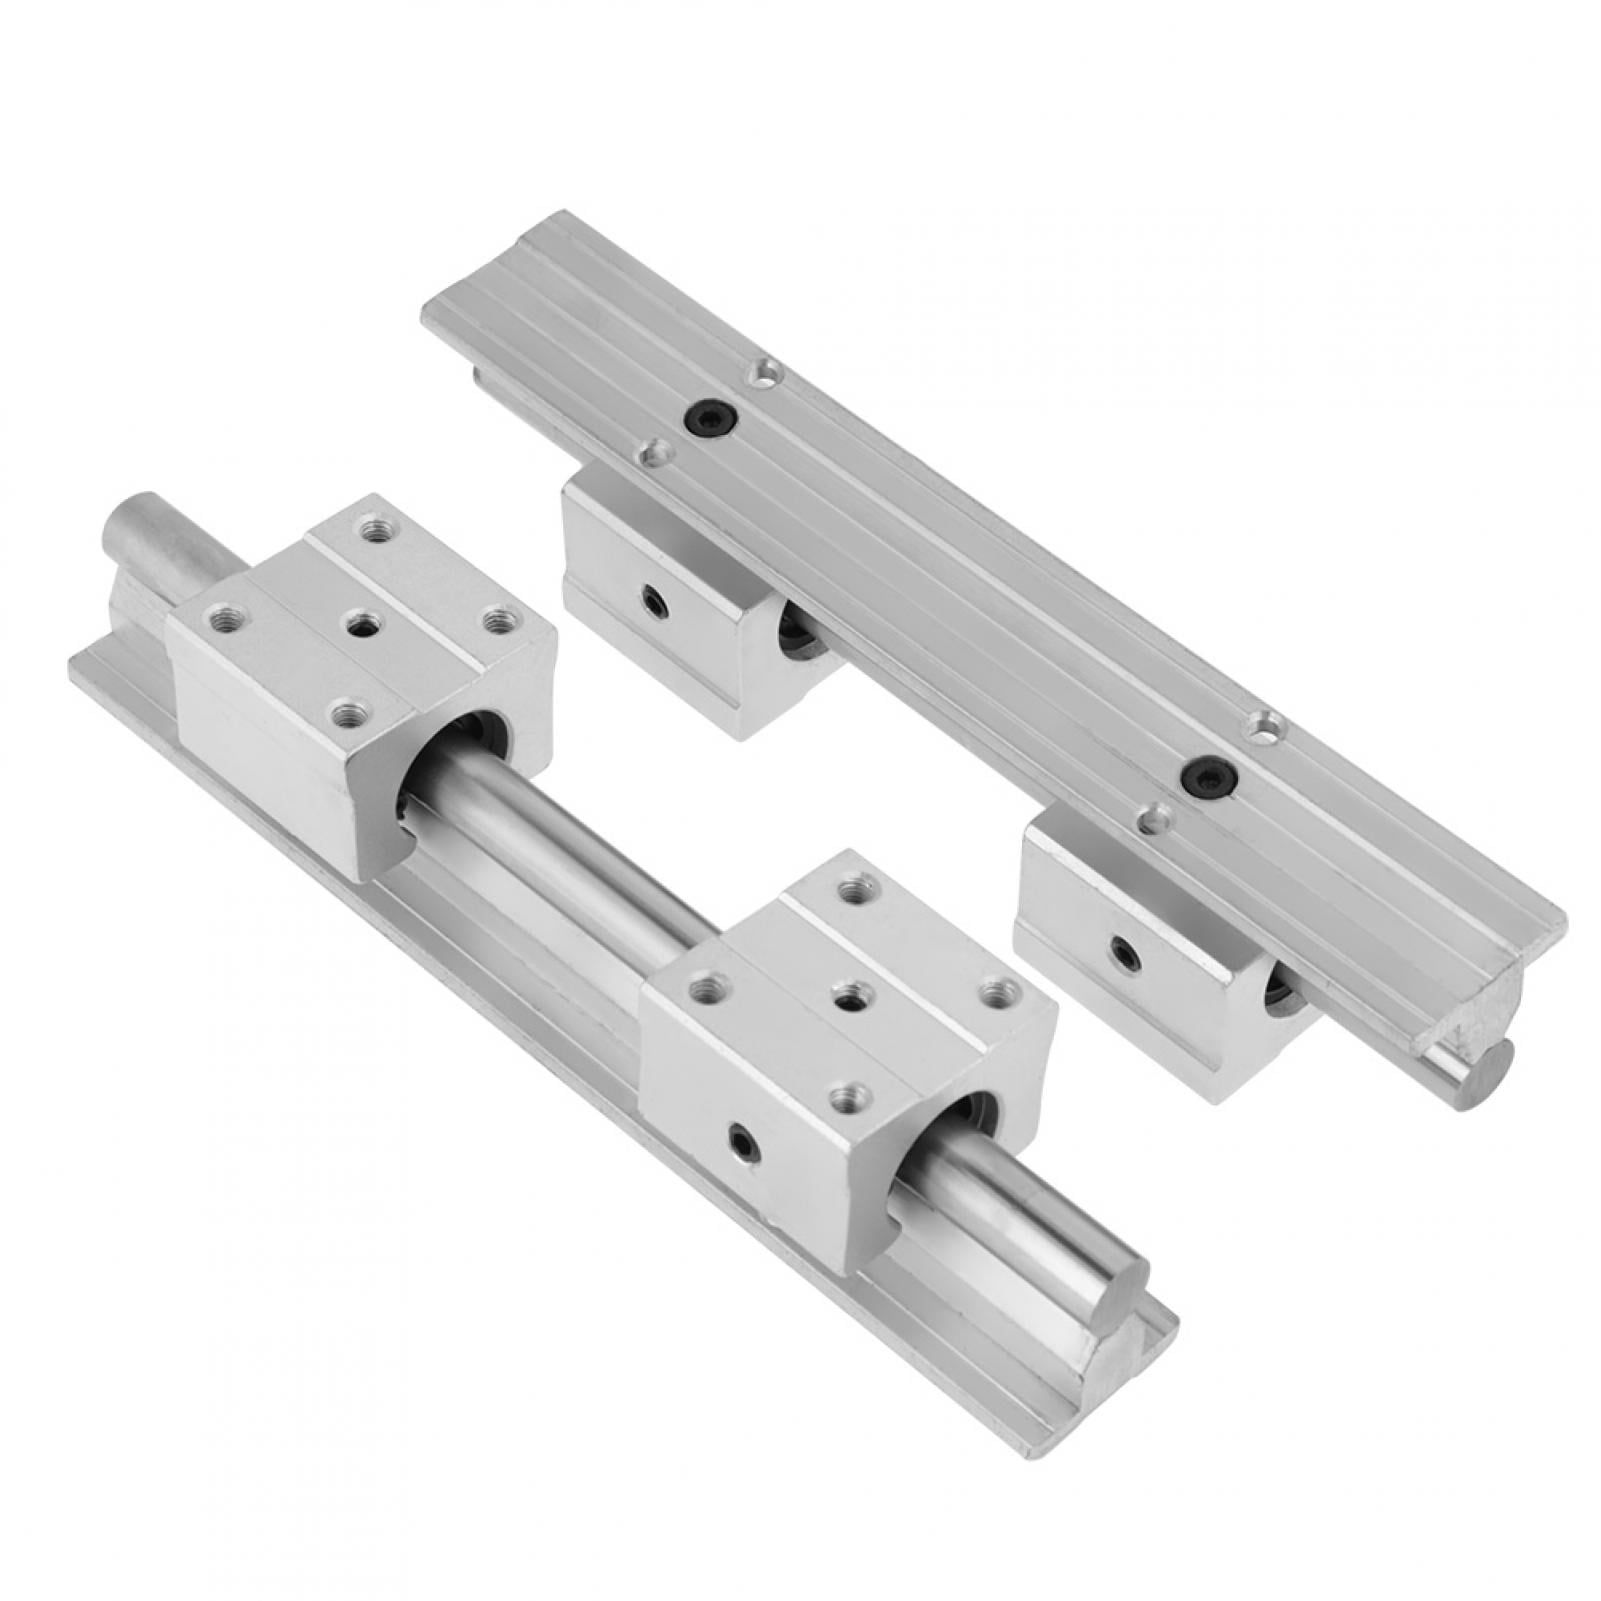 High Precision Bearing Block Linear Slide Rail Shaft Standardized Processing for CNC Routers Lathes Mills DIY Routers